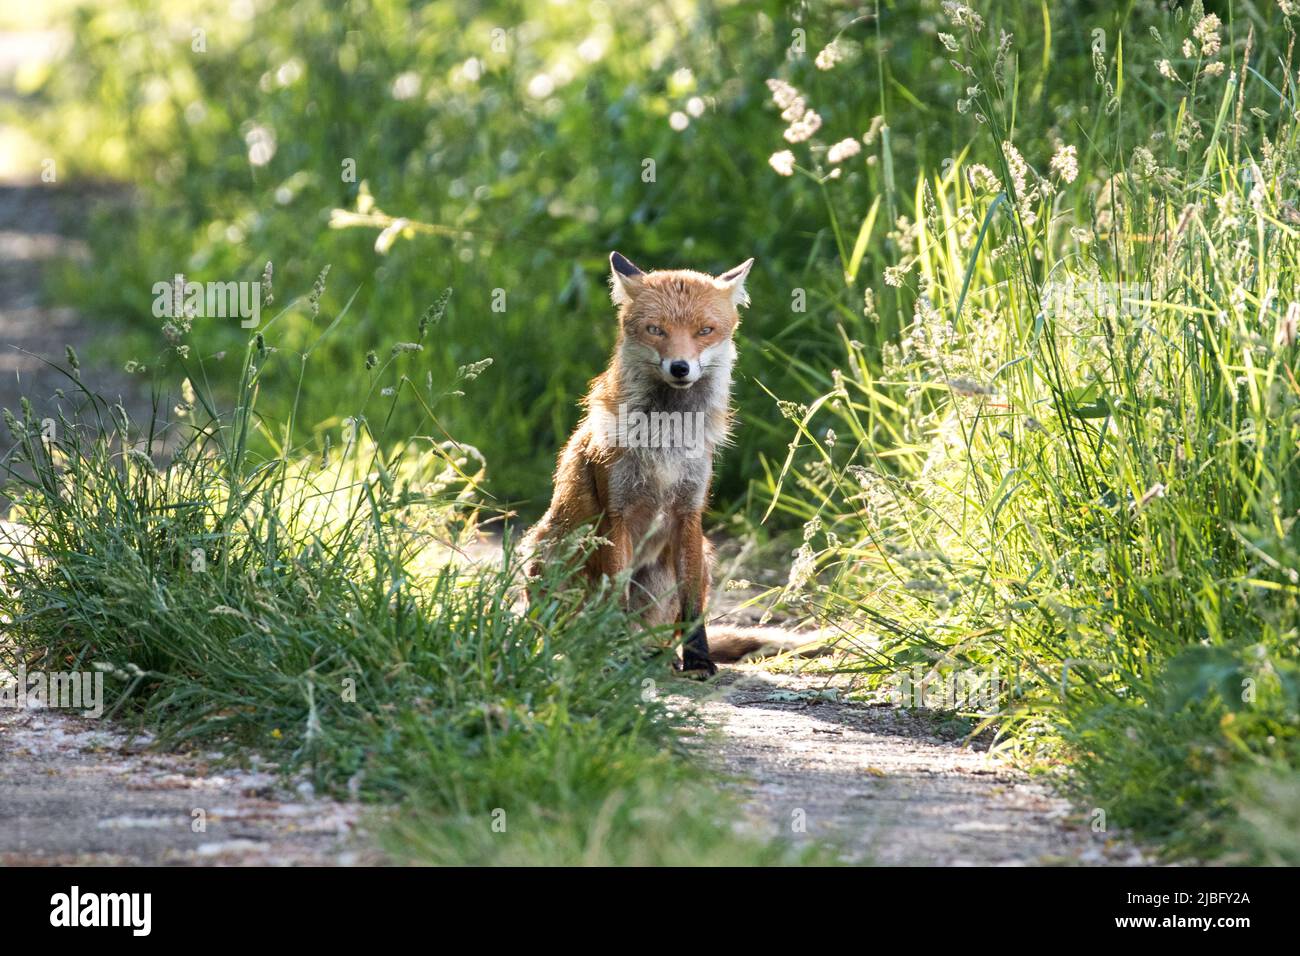 A fox sits and waits on a grassy pathway in Brentwood, Essex, UK. Brentwood has an urban and rural community of foxes that inhabit the area. Stock Photo